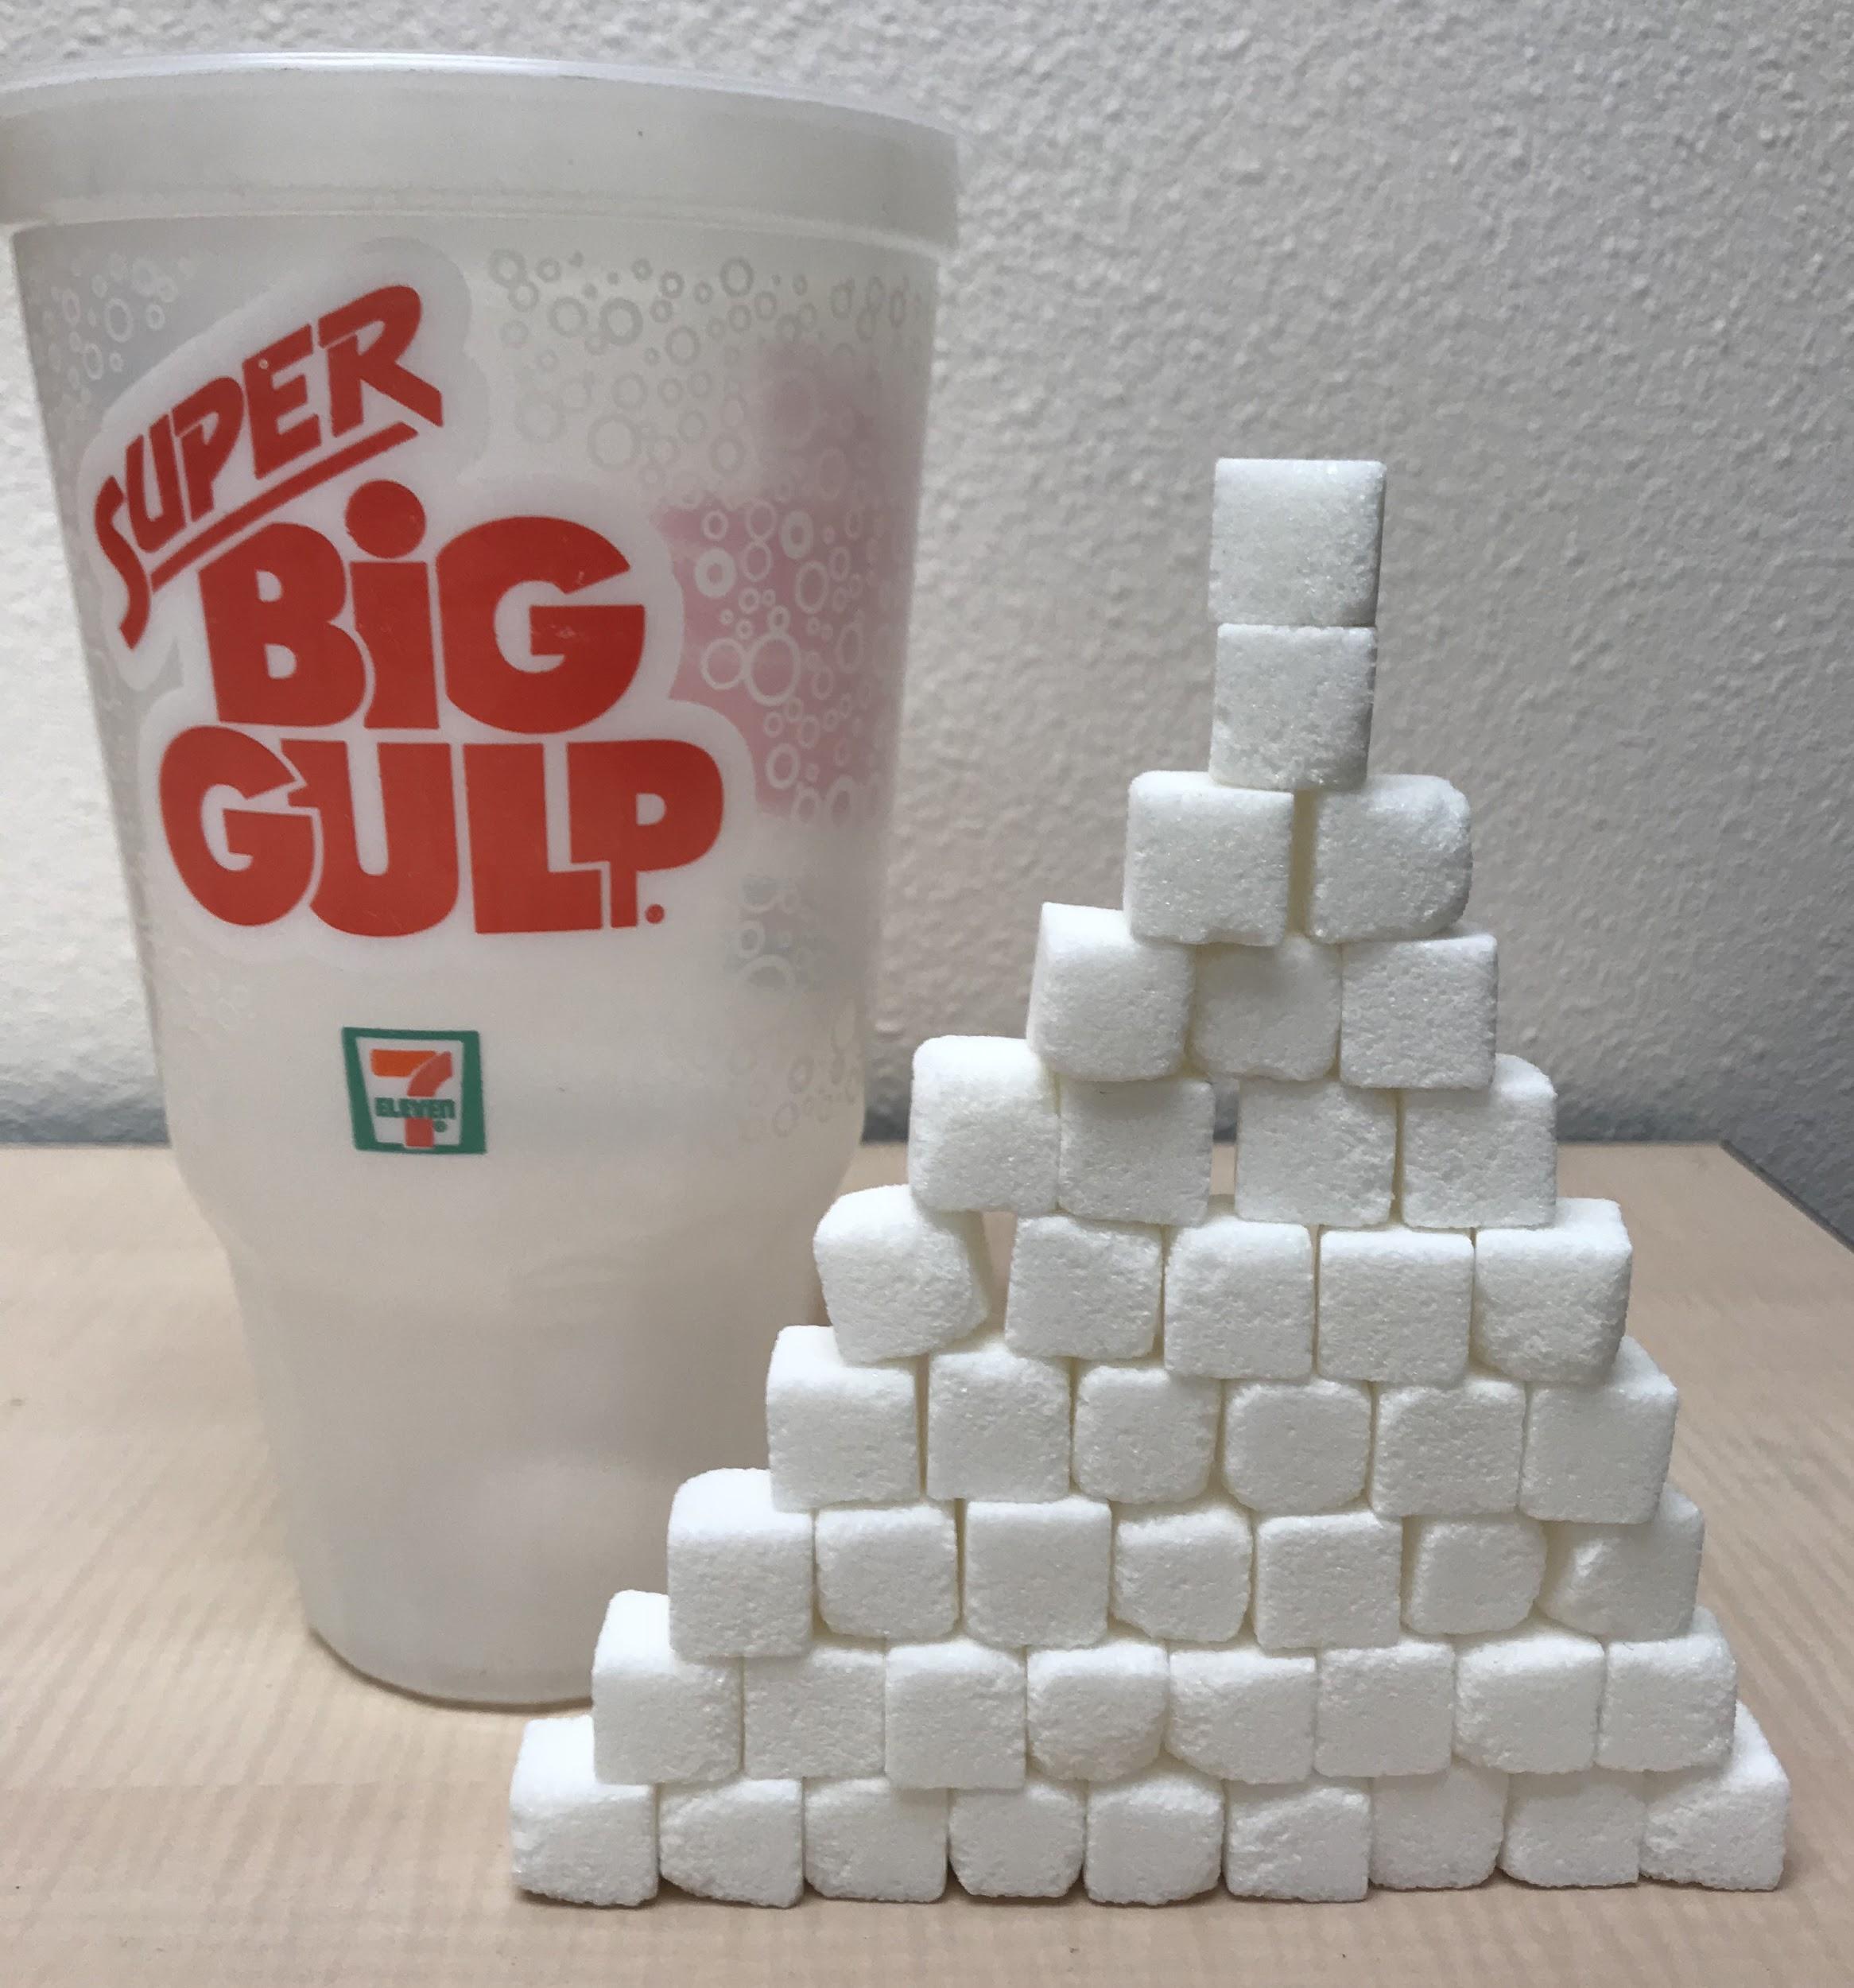 Forty six sugar cubes stacked next to a big gulp to illustrate the 46 teaspoons of sugar that the soda contains.